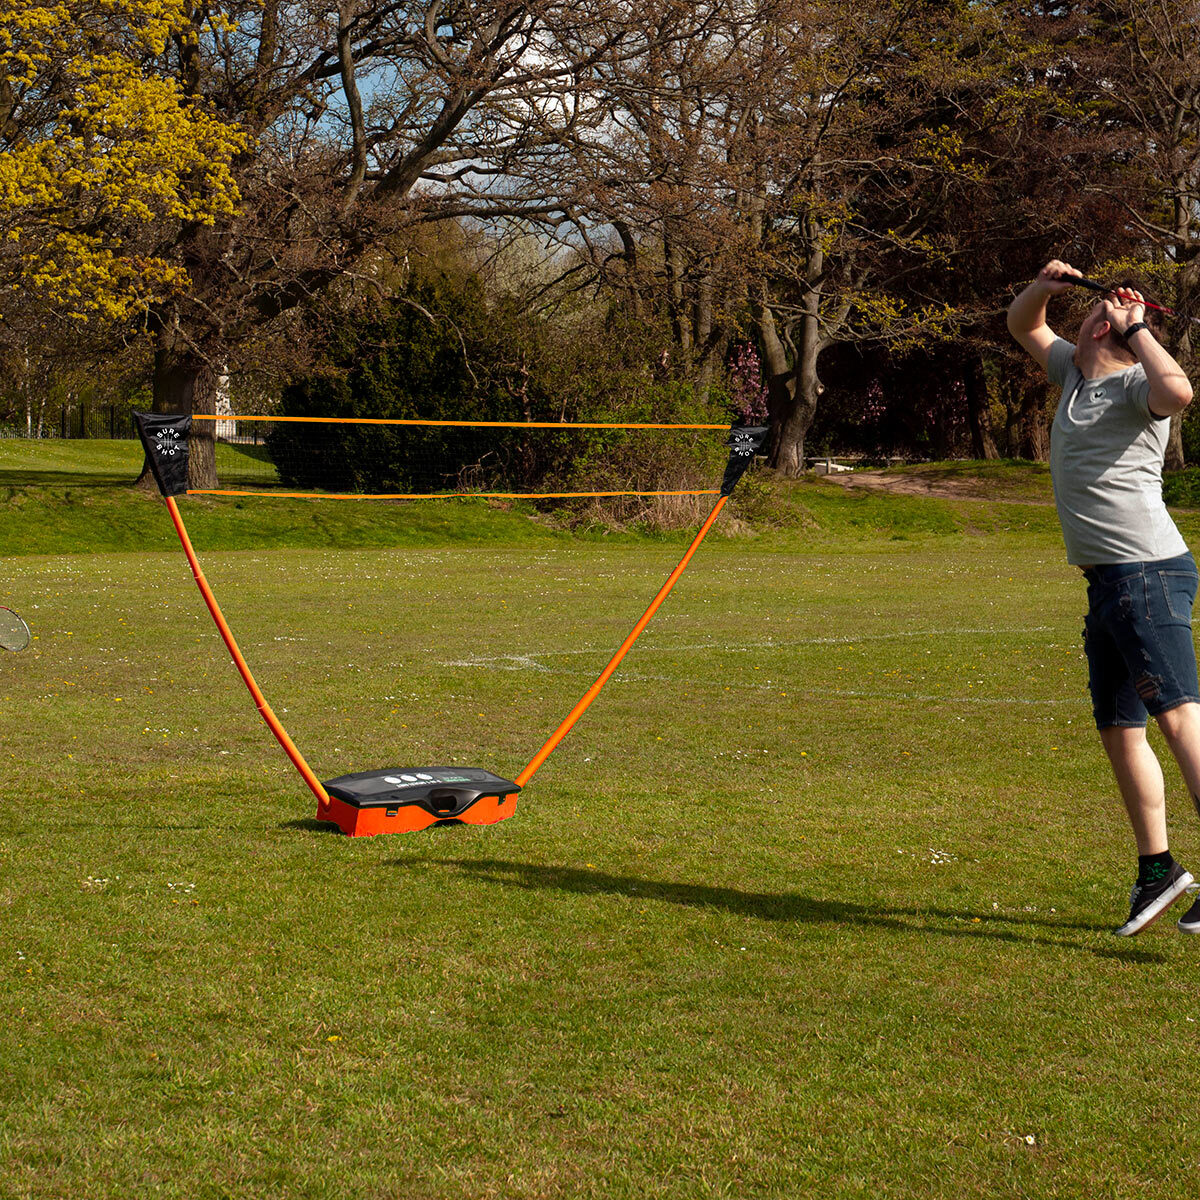 Lifestyle image for a game of Badminton using the Sureshot 3 in 1 Garden set